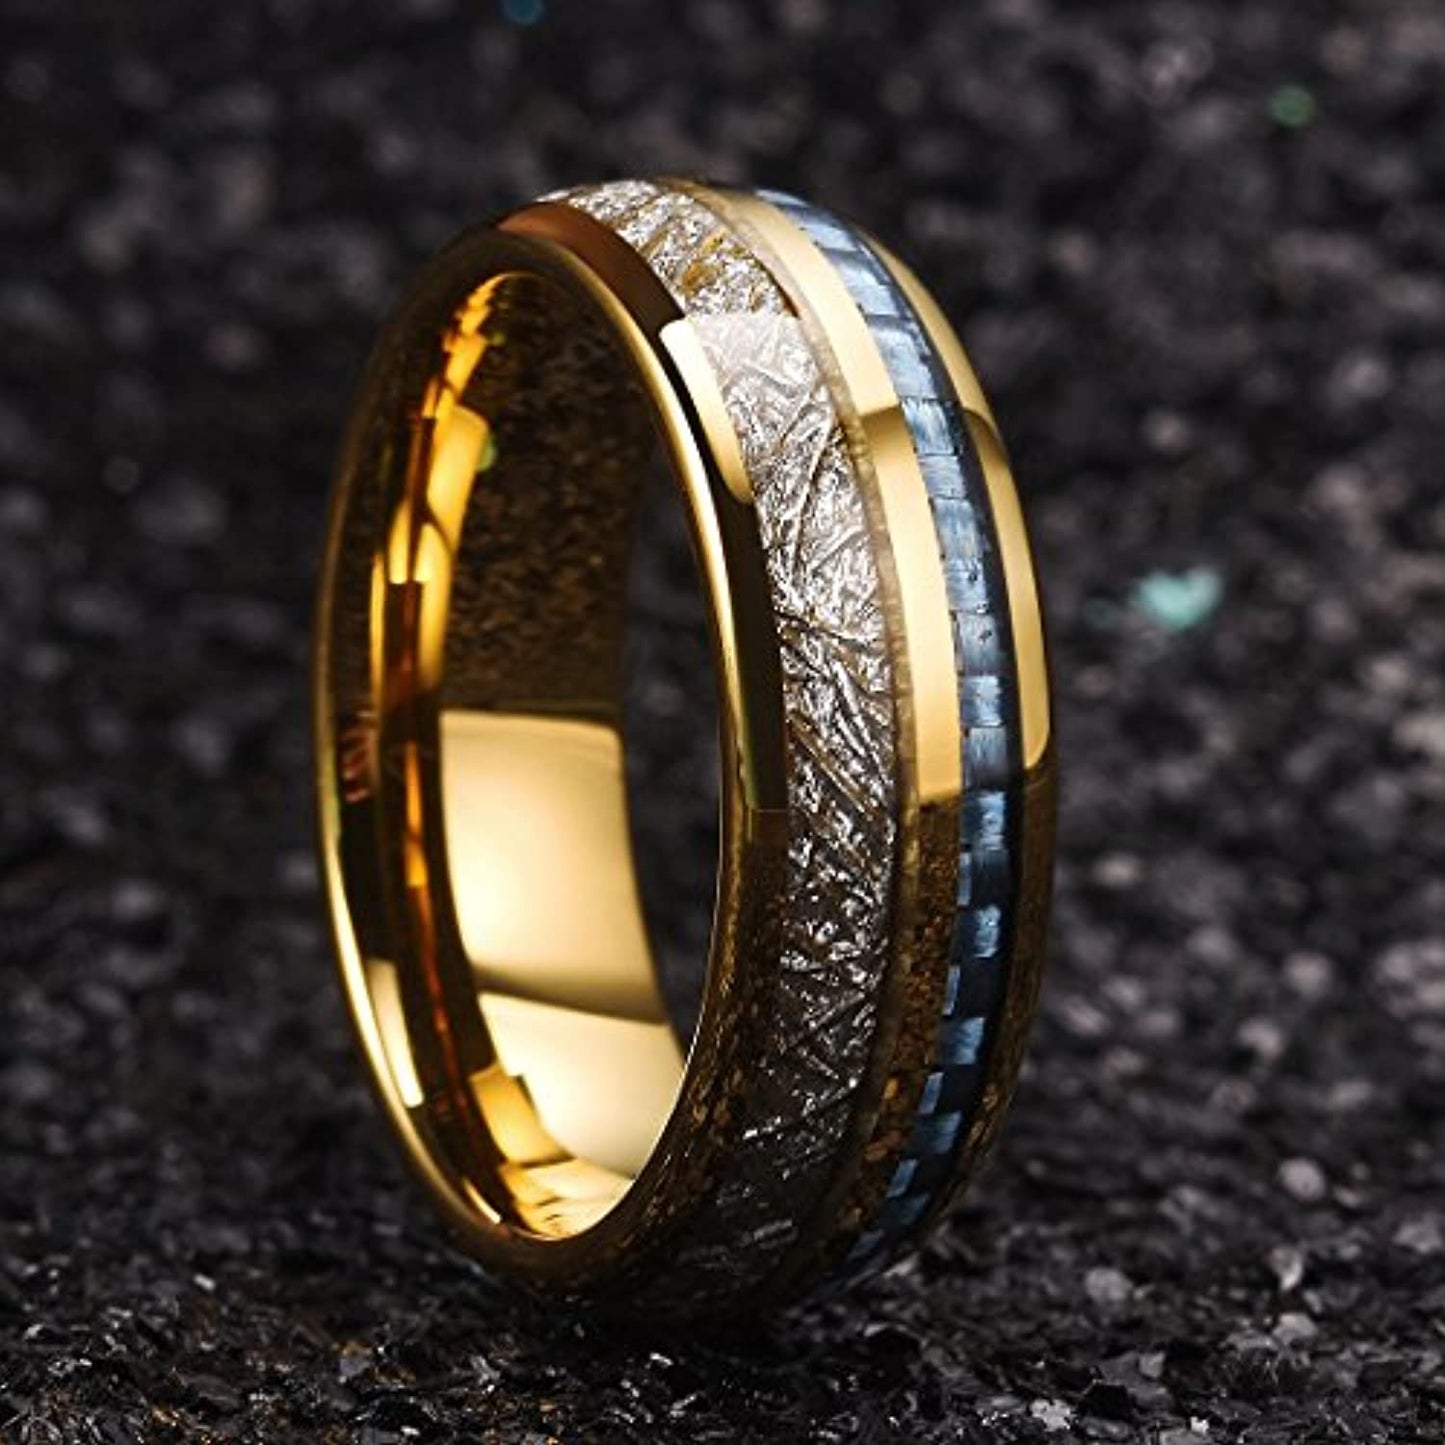 Gold Polished Tungsten Carbide Ring with Meteorite and Carbon Fiber Inlay | 7mm